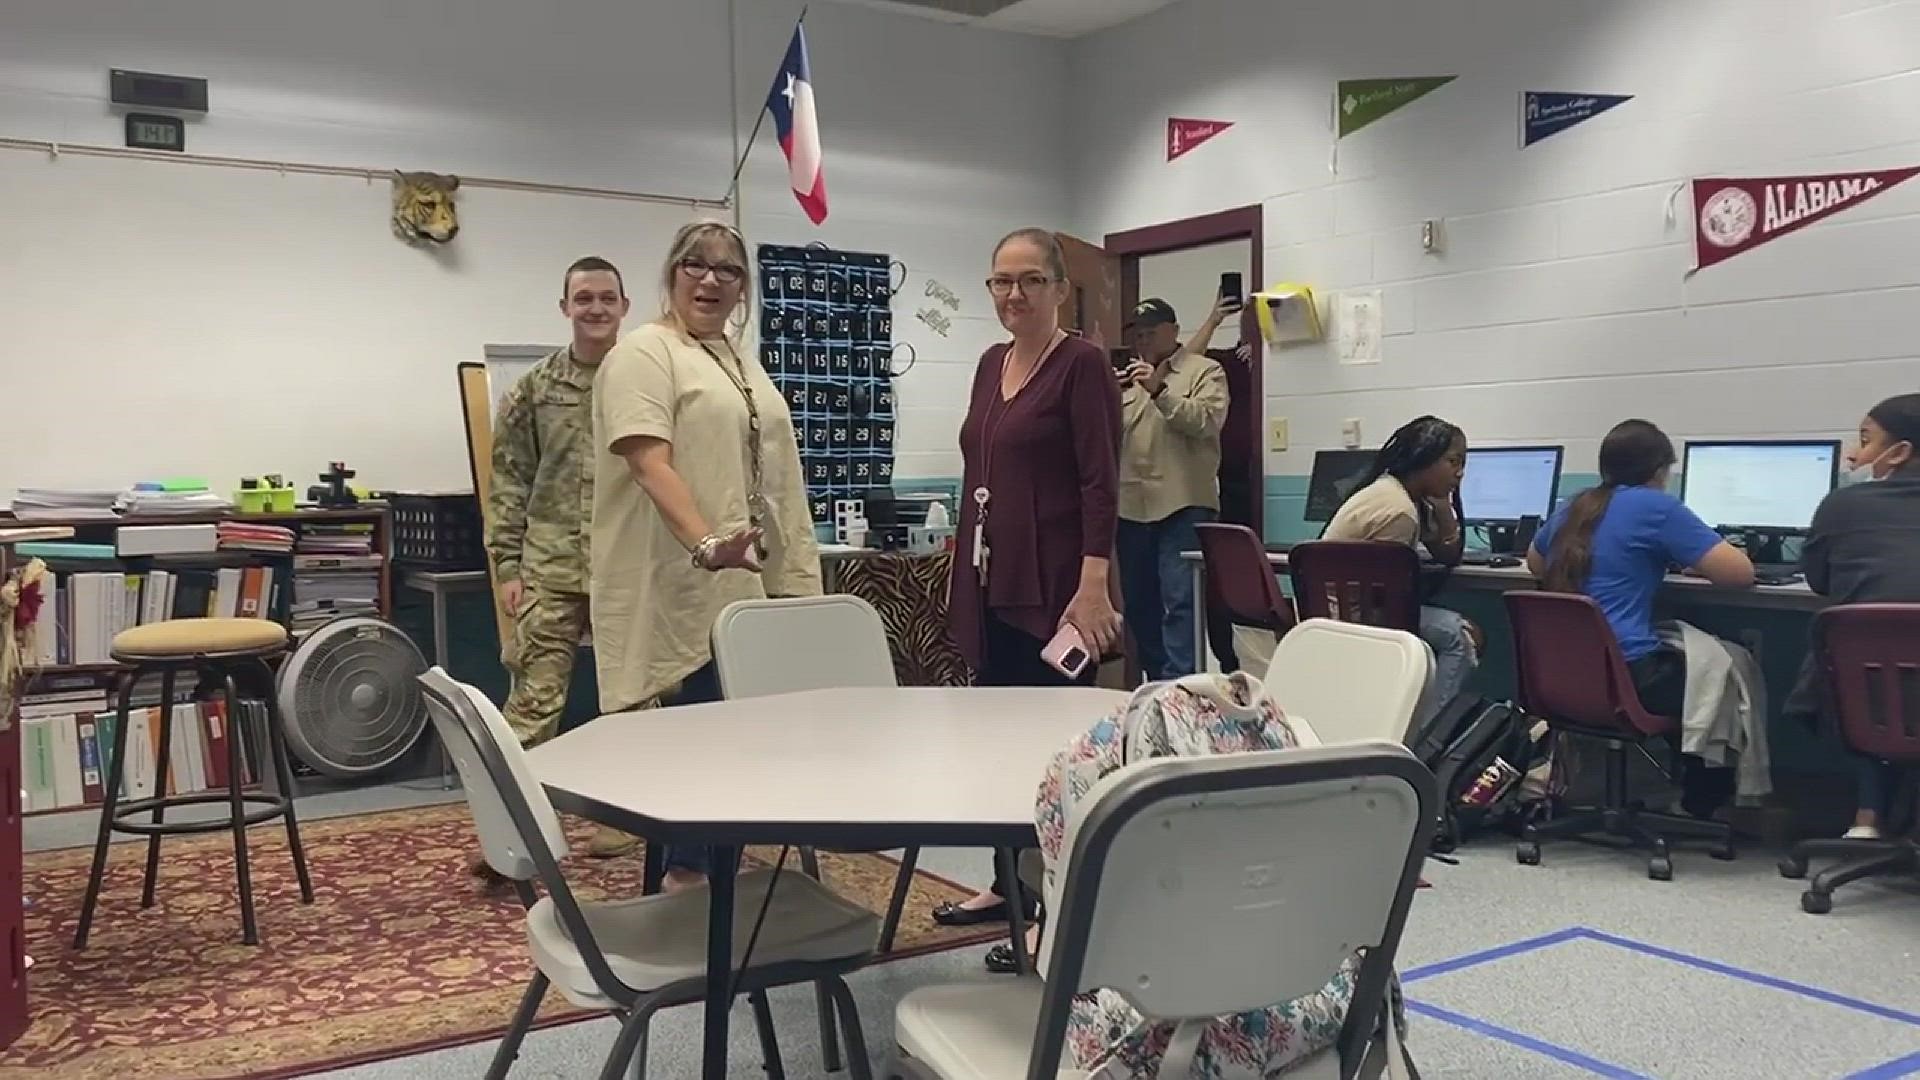 Tears were flowing in a Silsbee High School classroom Wednesday after an active-duty soldier with Southeast Texas roots paid his mother a surprise visit.